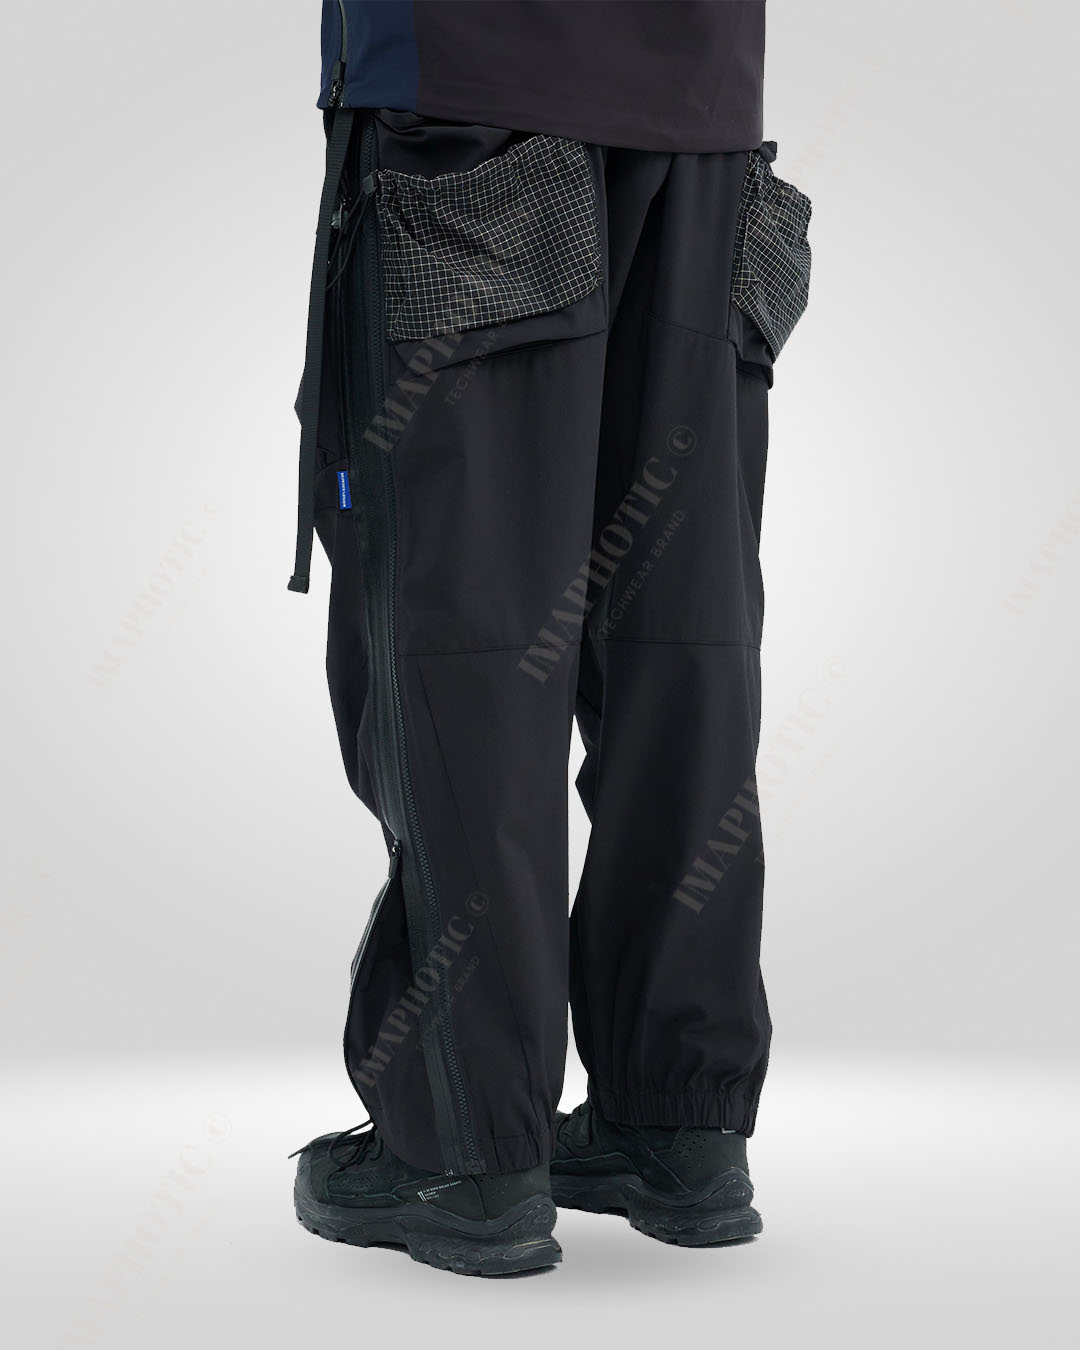 Buy Olive Track Pants for Men by Styli Online | Ajio.com